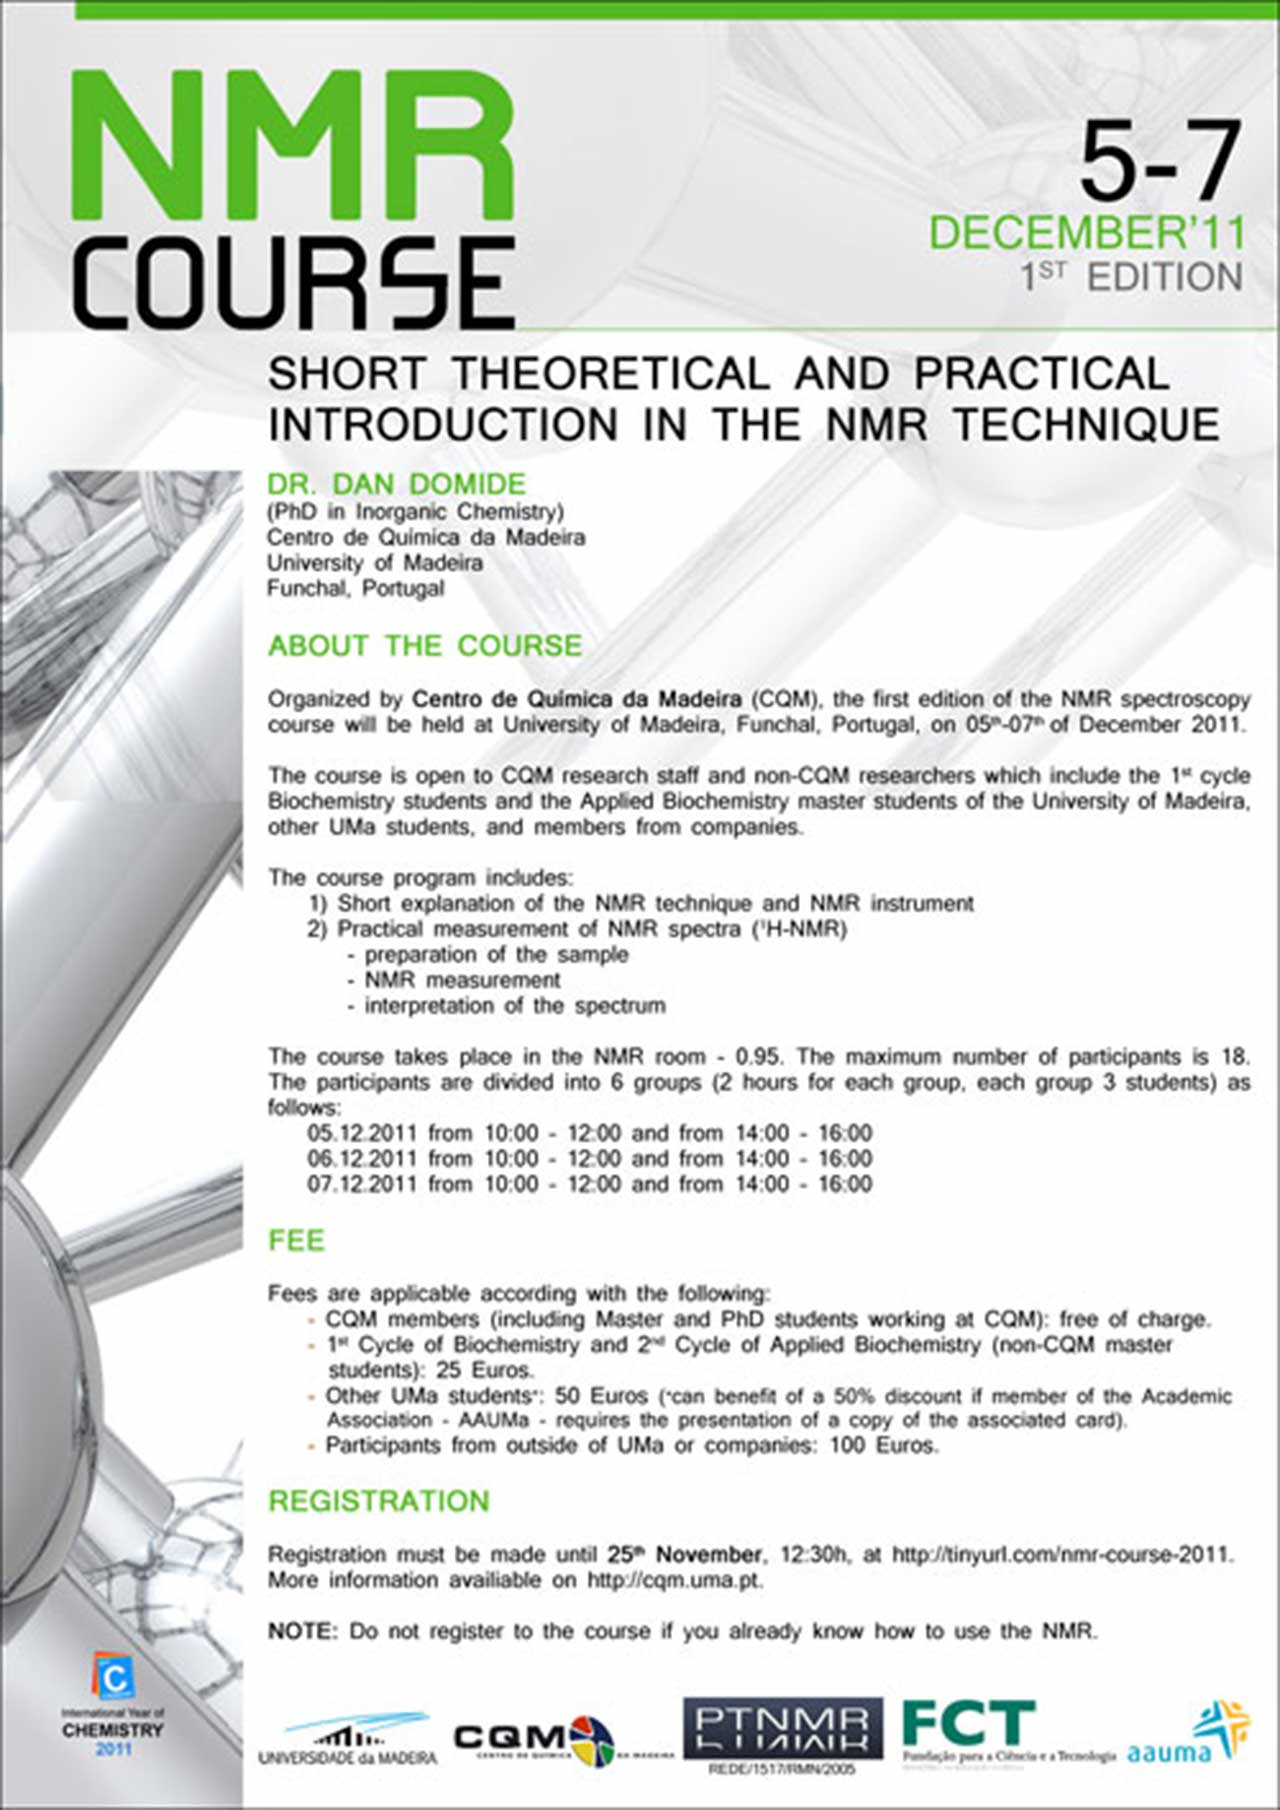 1st Edition of NMR course: "short theoretical and practical introduction in the nmr technique (15 participants)" poster